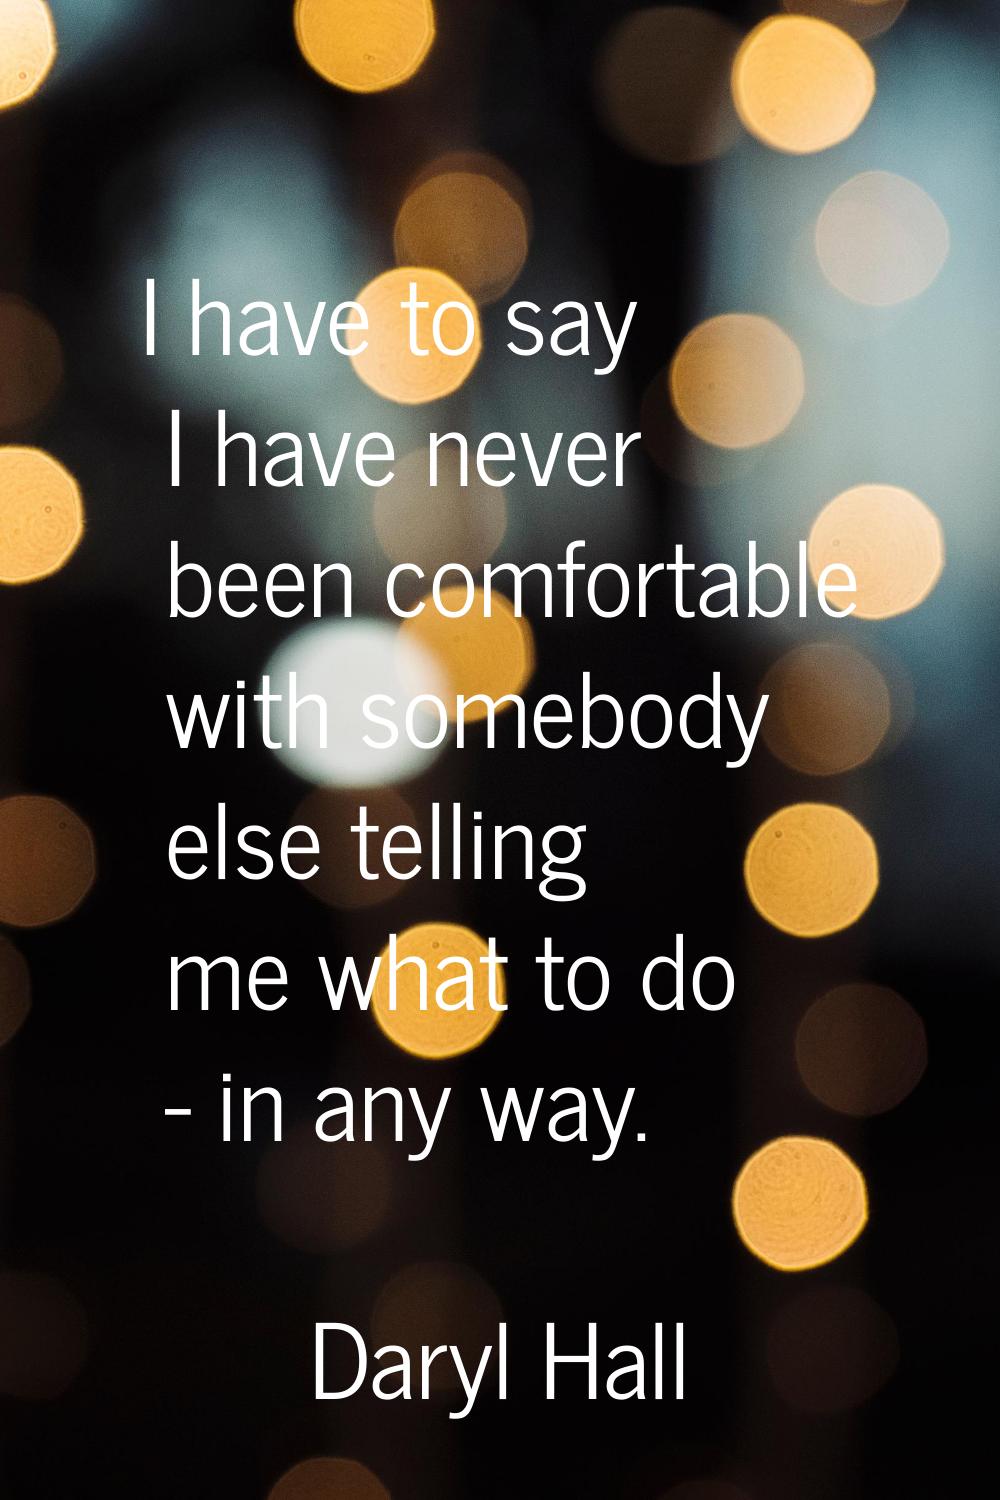 I have to say I have never been comfortable with somebody else telling me what to do - in any way.